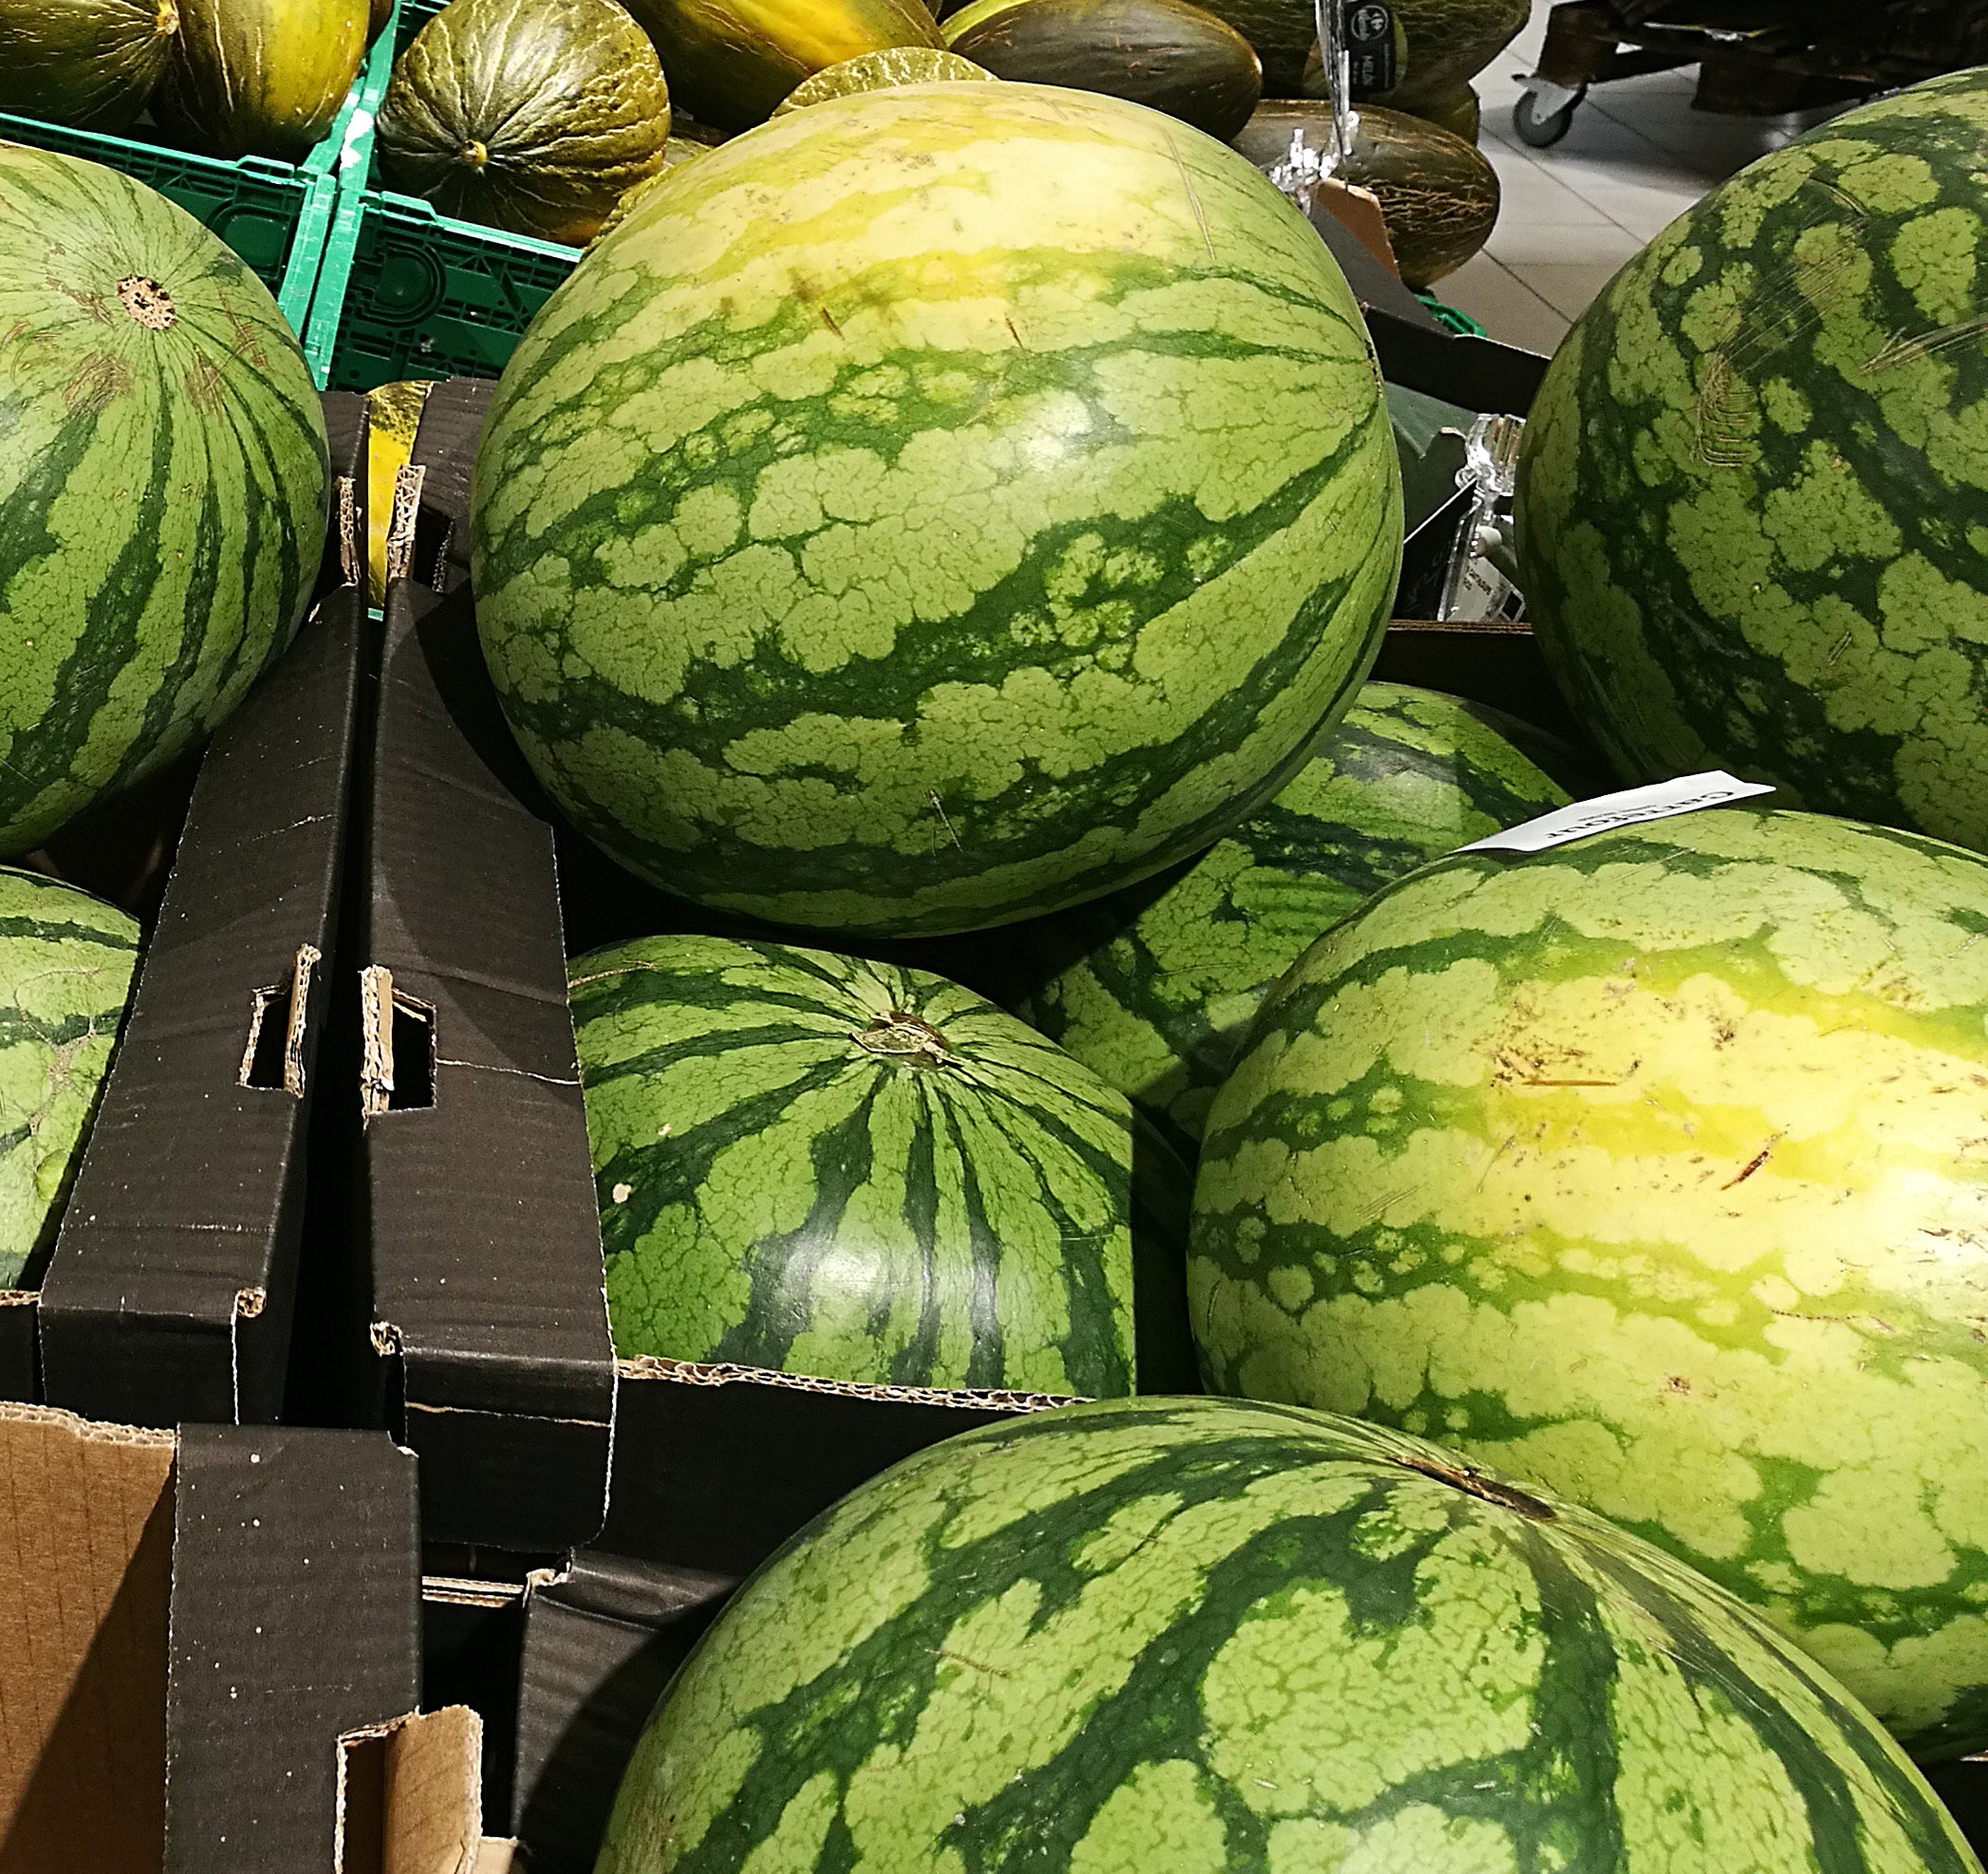 watermelons in cardboard boxes